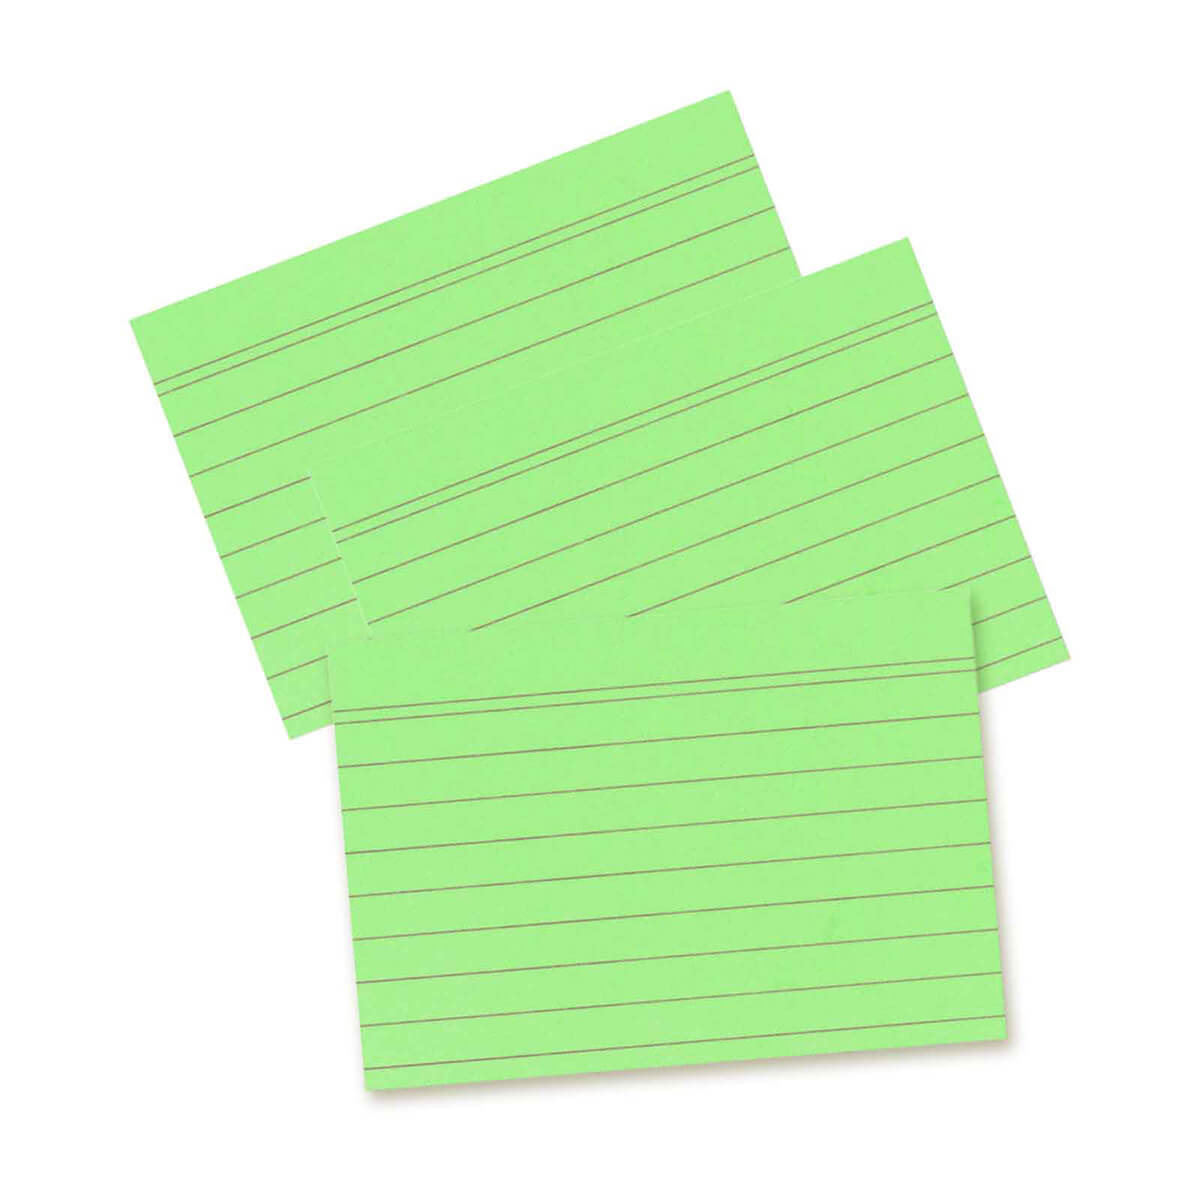 Herlitz Index cards lined 100 pieces shrink-wrapped a5 Green